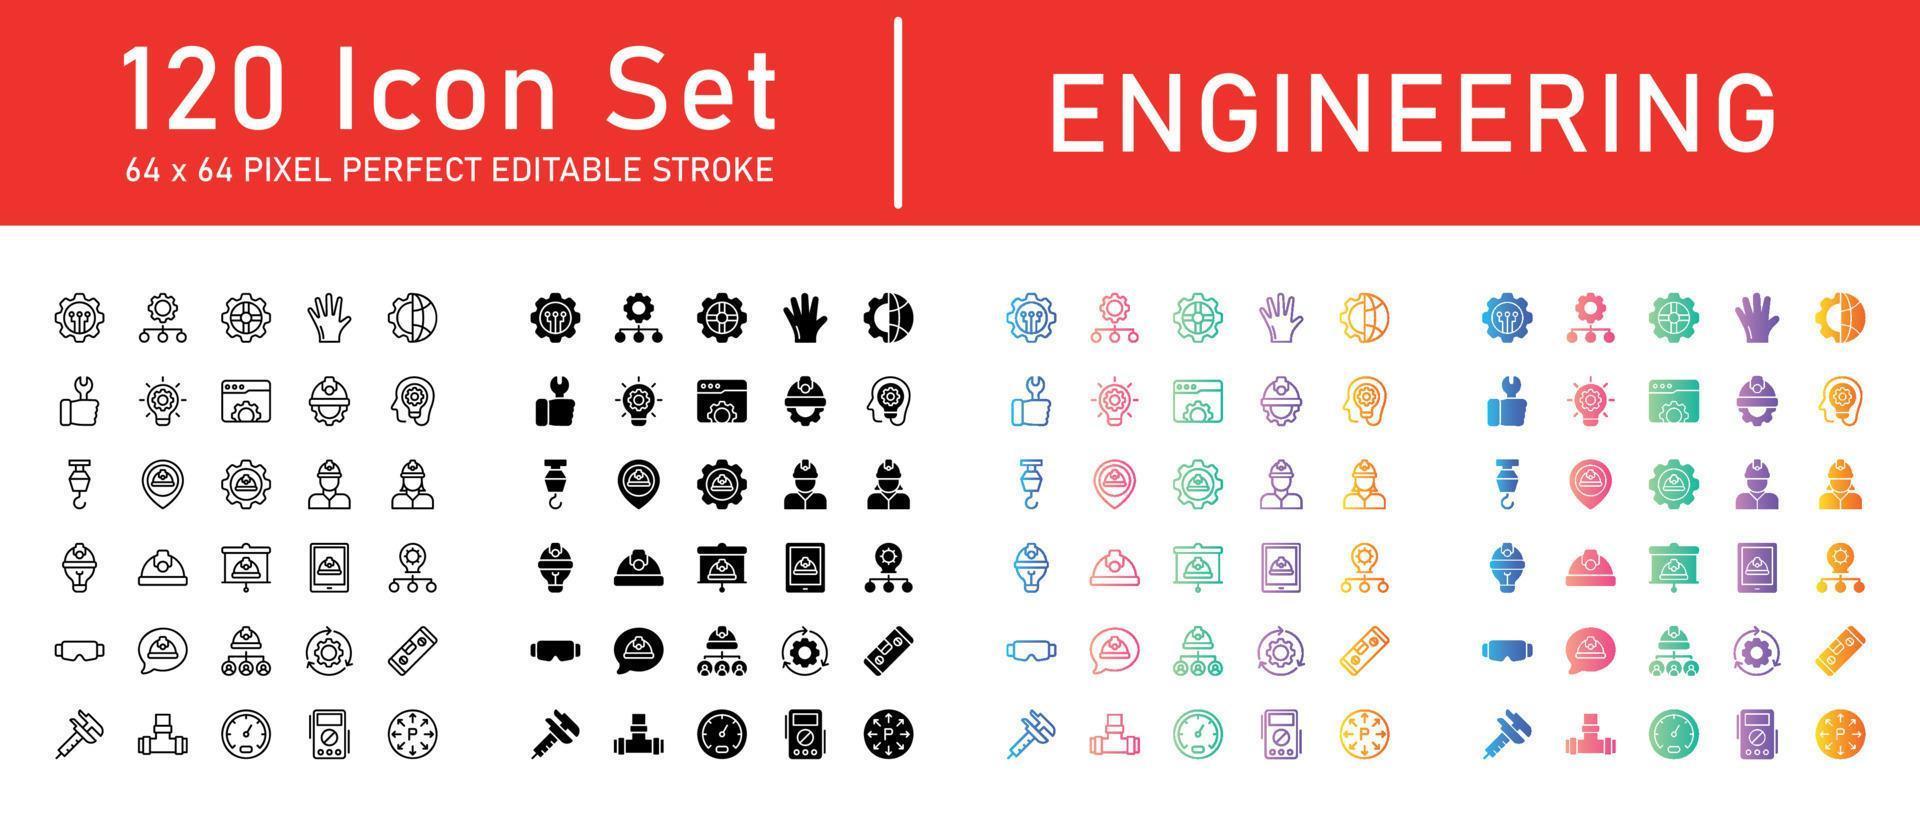 engineering icon pack vector